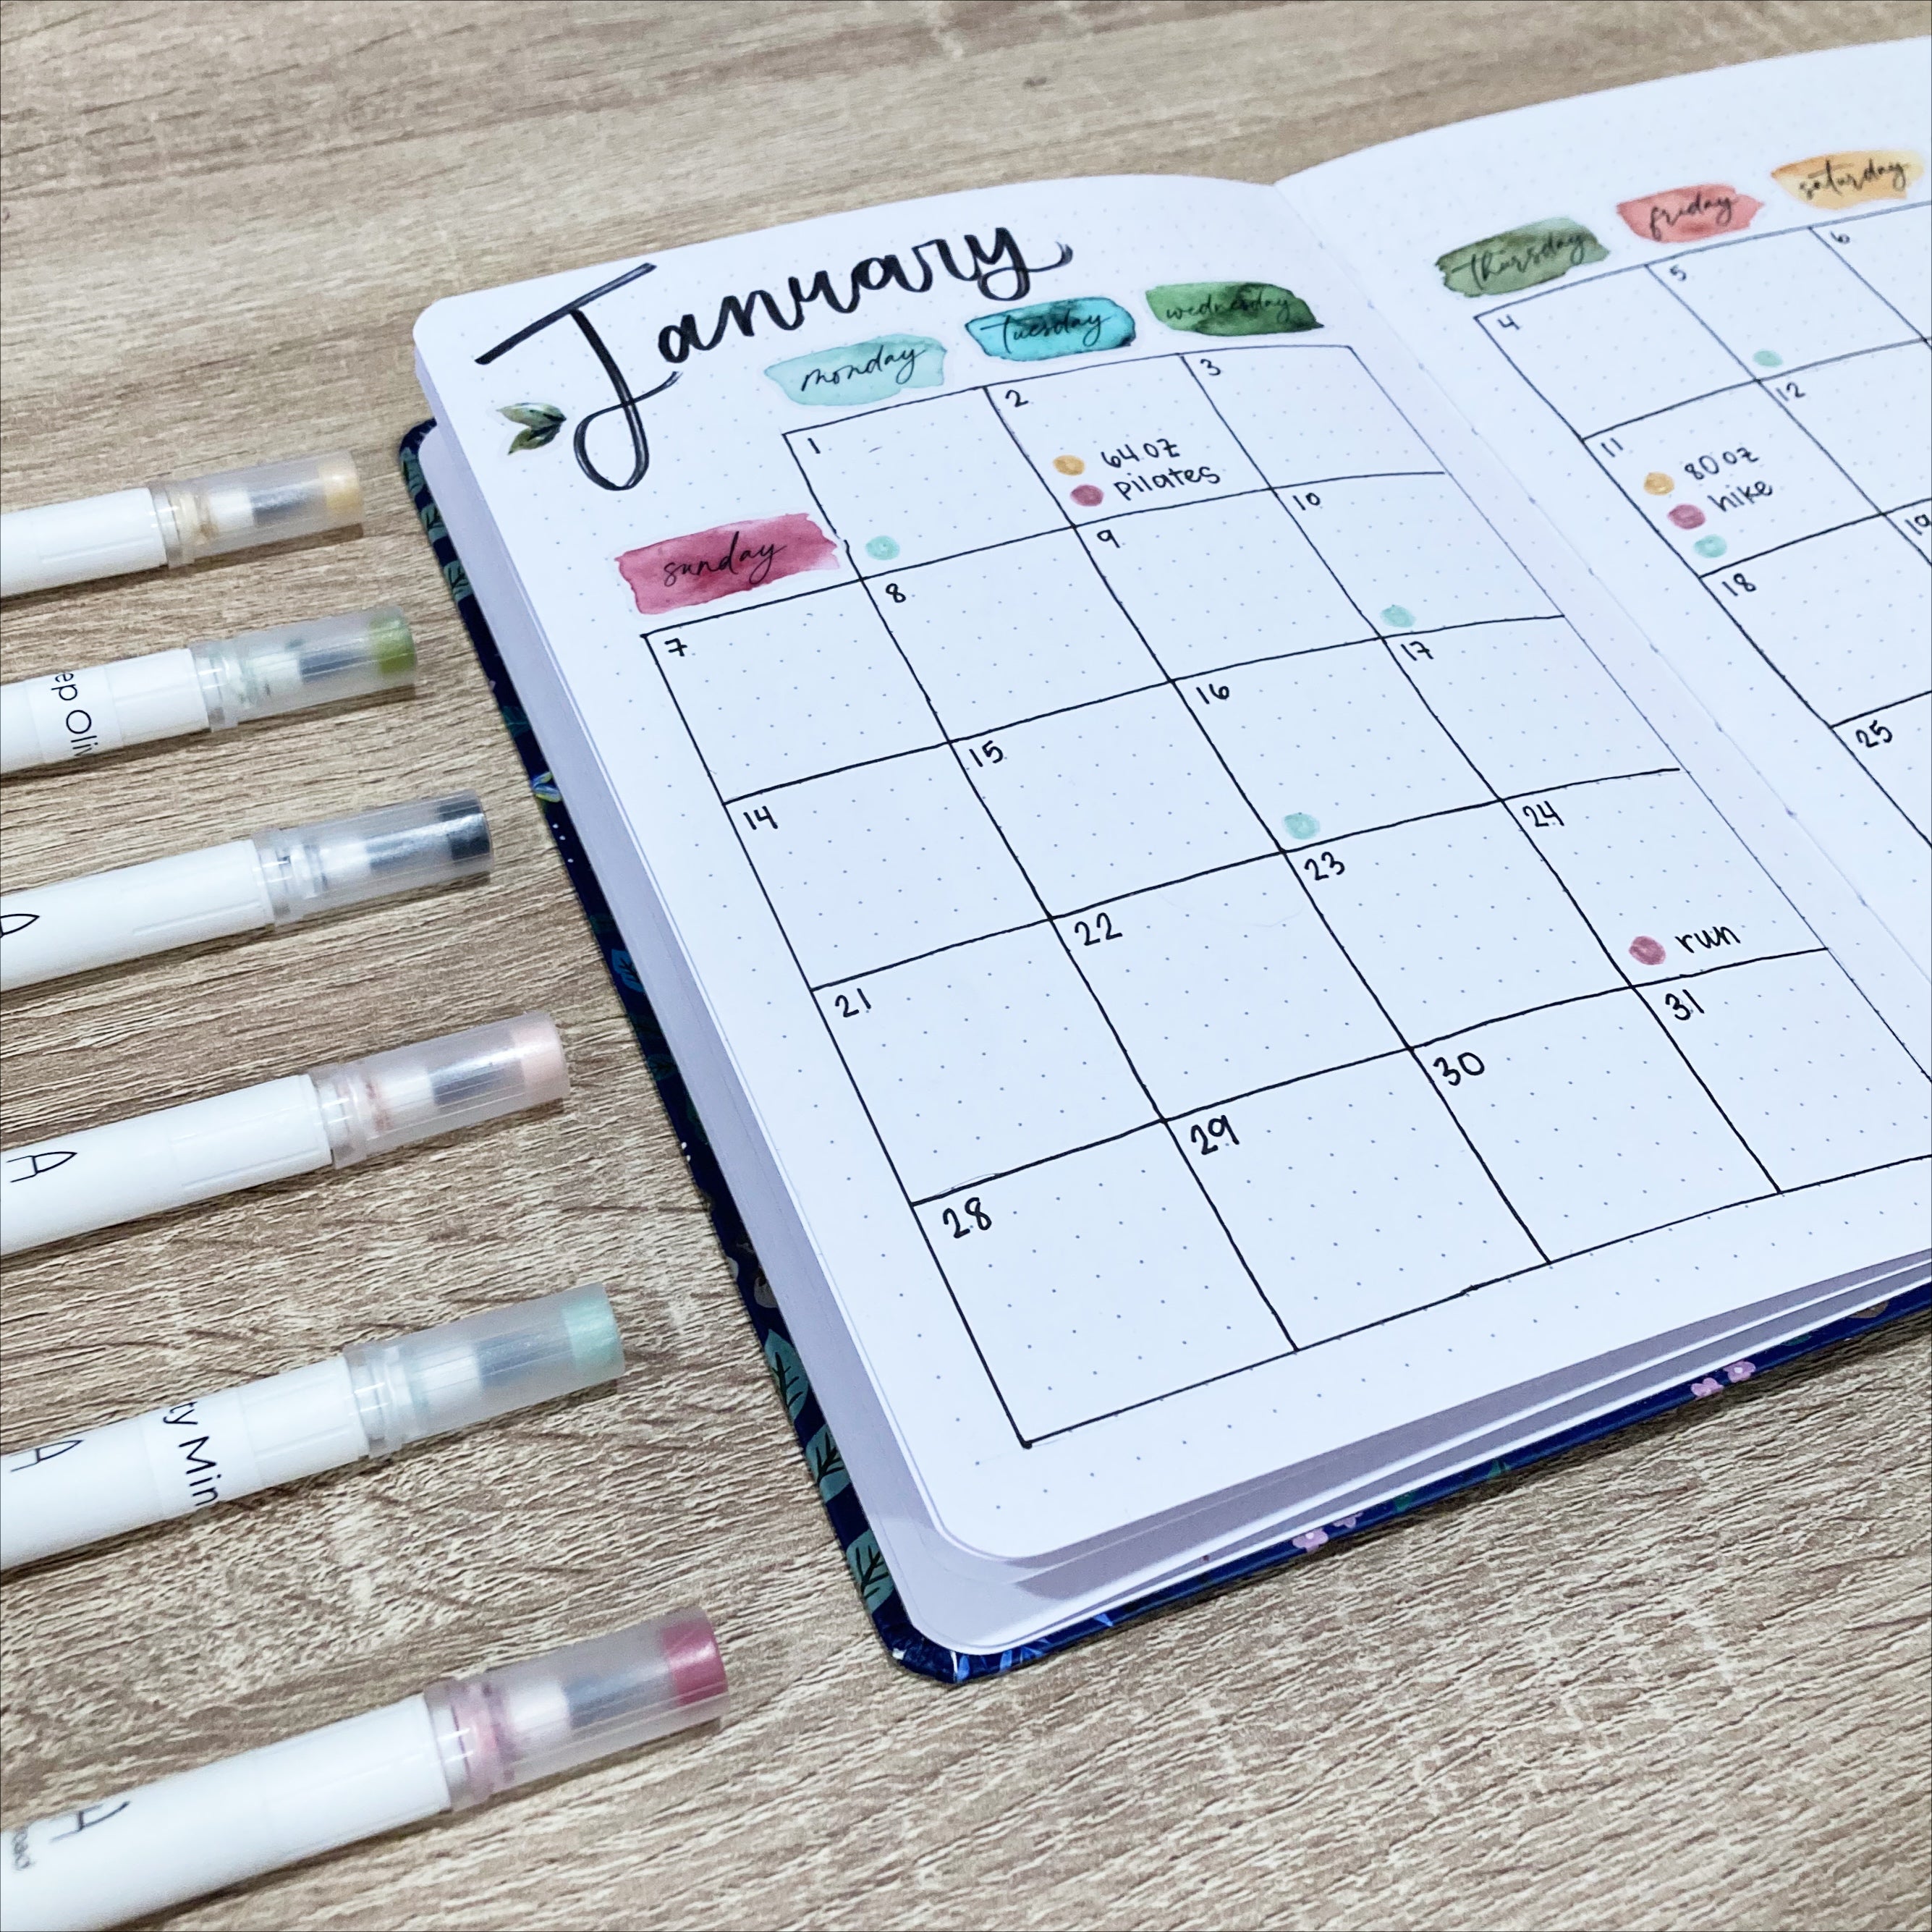 4 Simple Spreads to Jump Start your Wellness Bullet Journal Journey ...